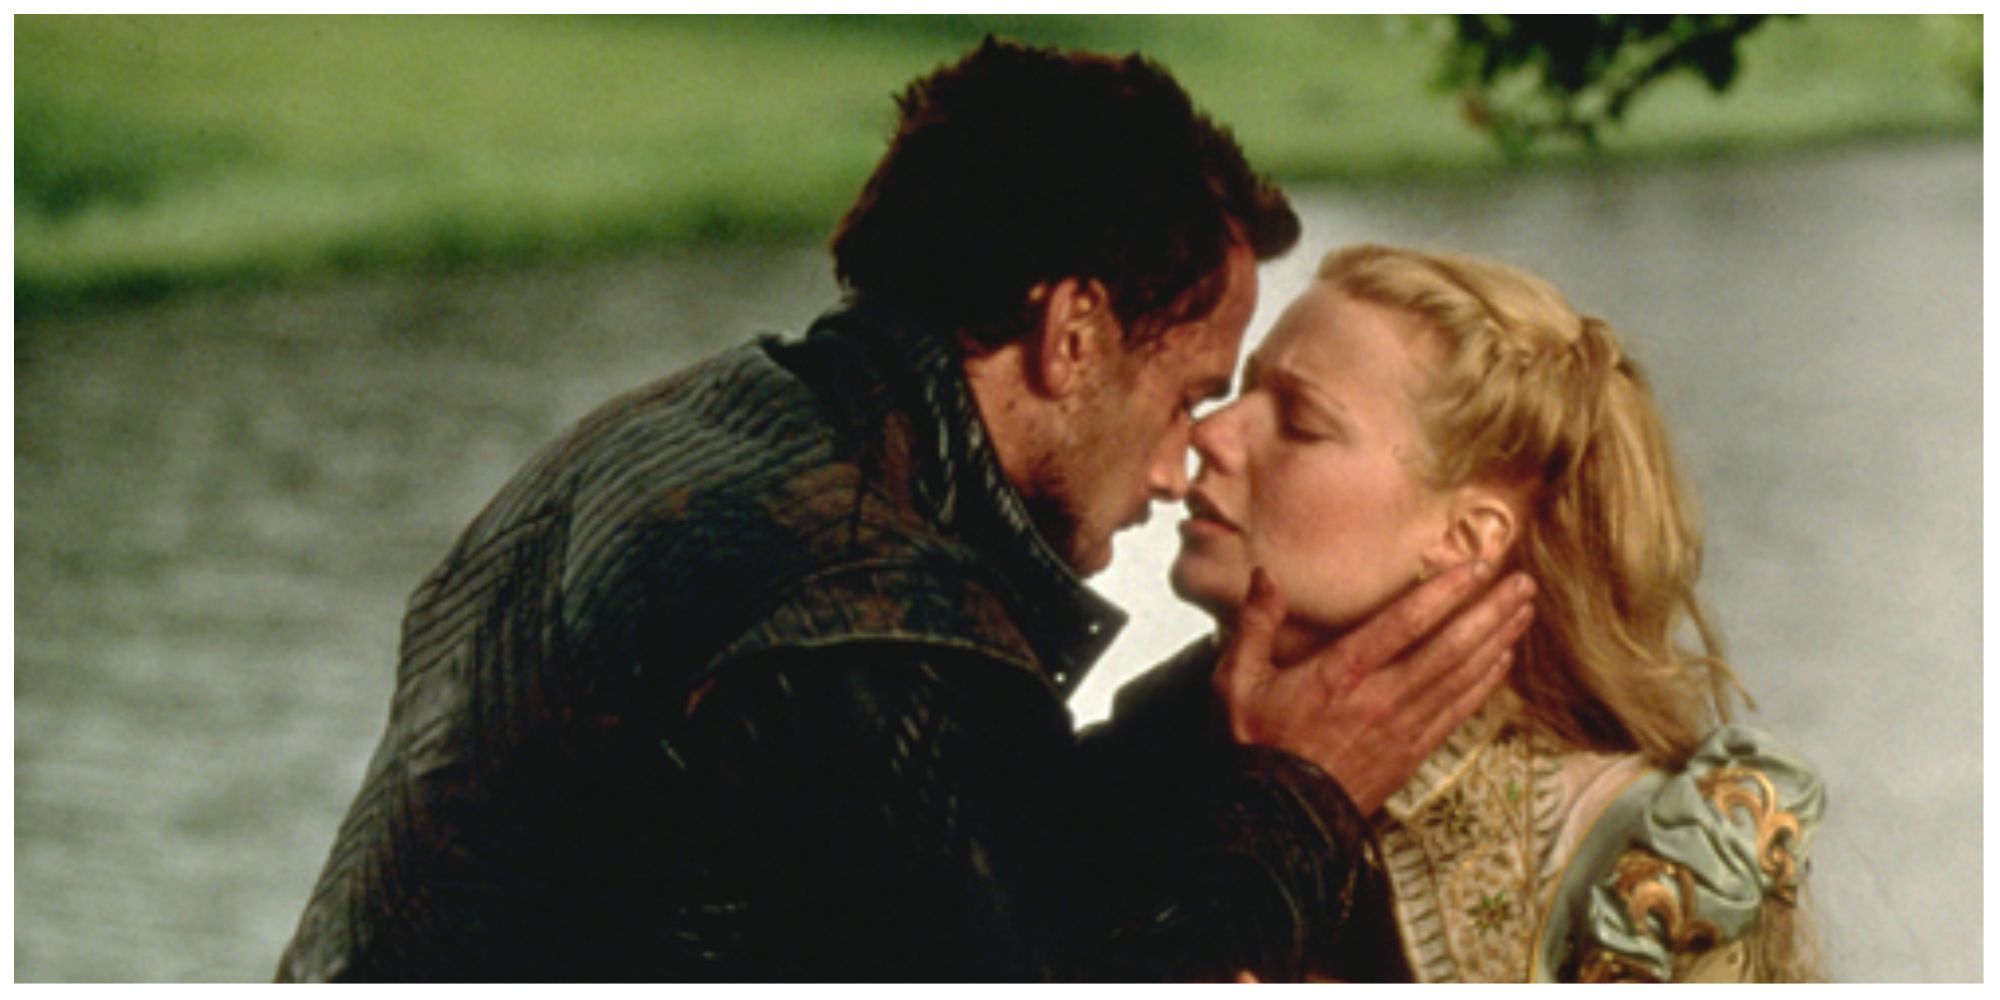 Joseph Fiennes and Gwyneth Paltrow in Shakespeare in Love